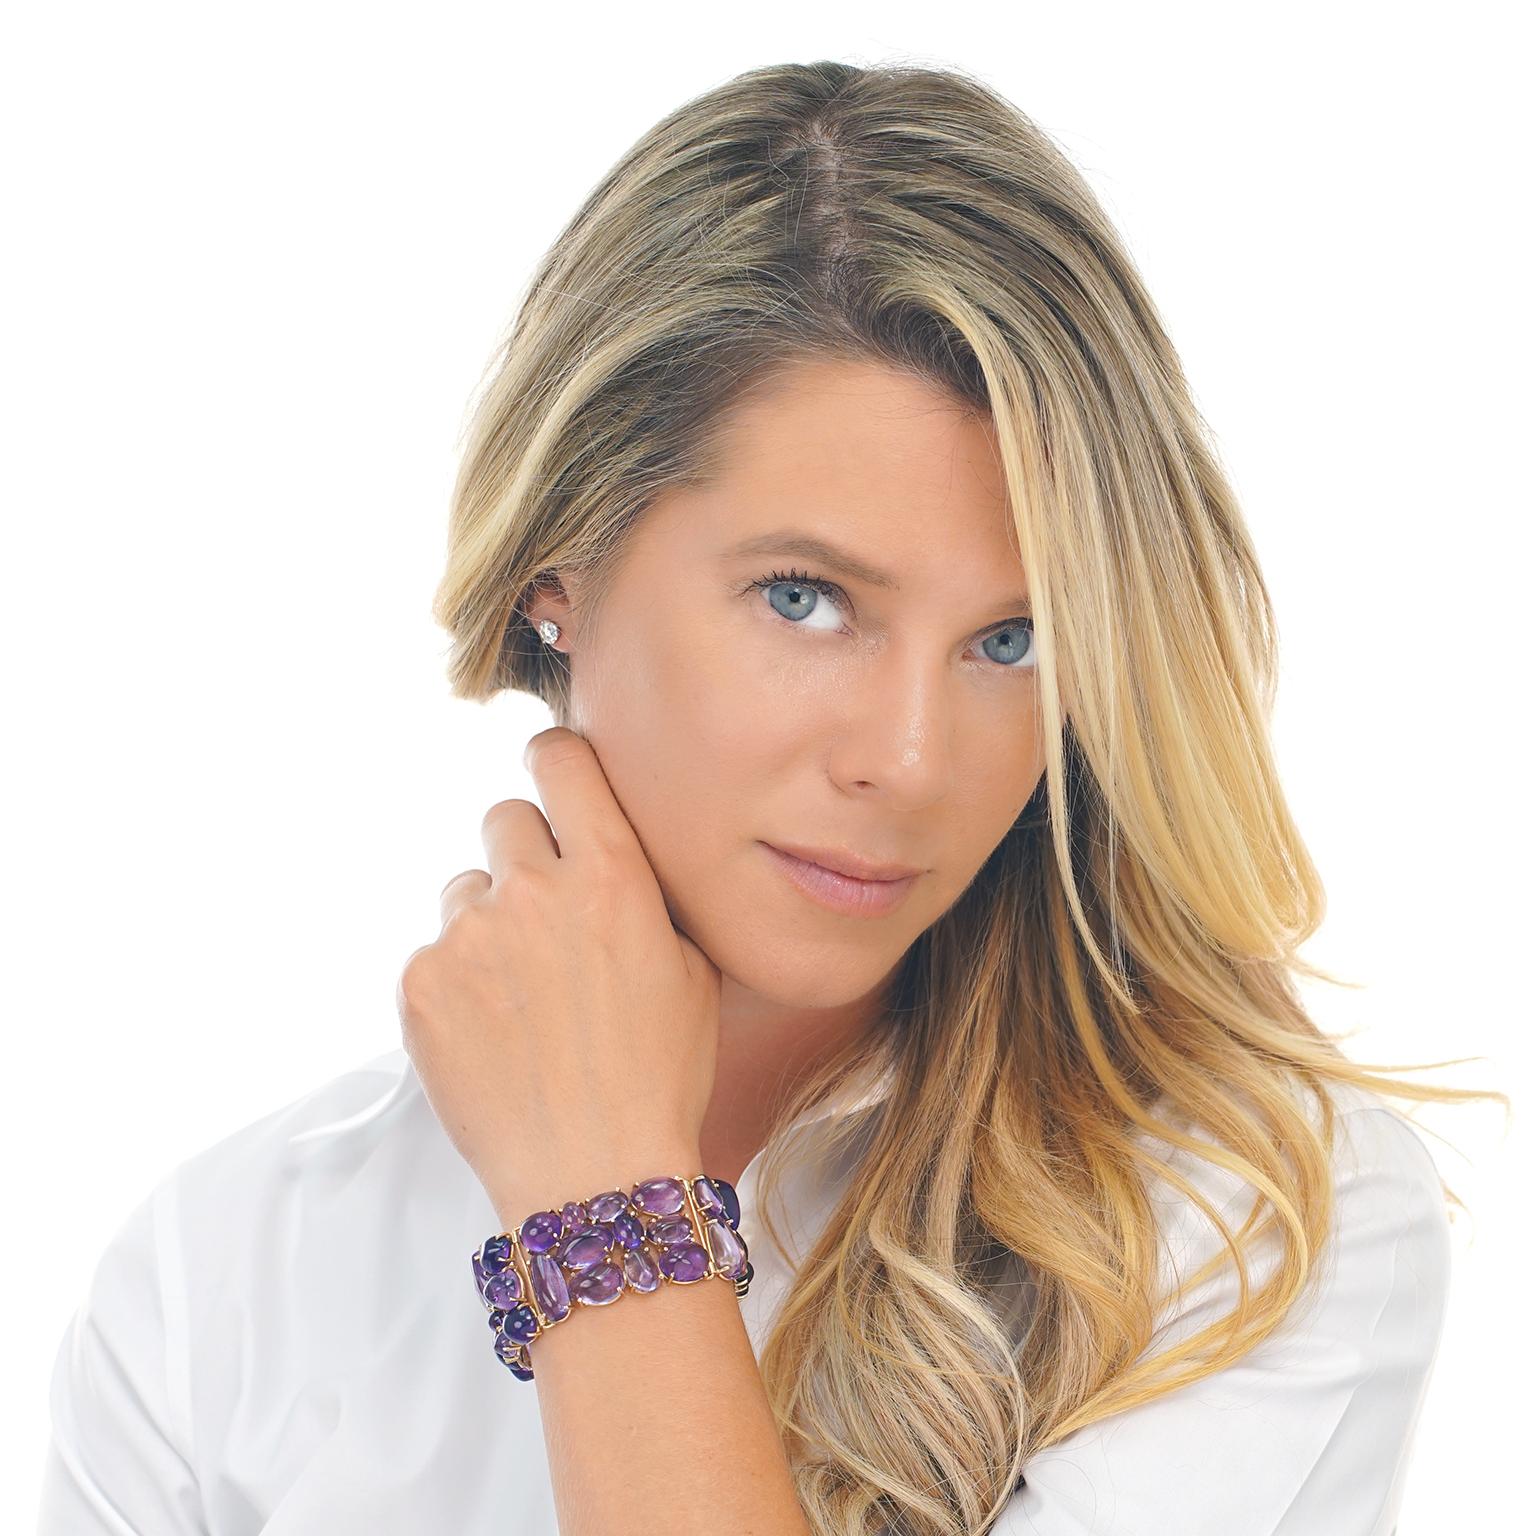 Circa 1970s, 14k, American. This bracelet is a lush brushstroke of vivid purple amethyst cabochons. 250 carats of stones flowing from lavender to lilac and violet are perfectly puzzled together in a cobblestone motif. The vibrant, easy-breezy look